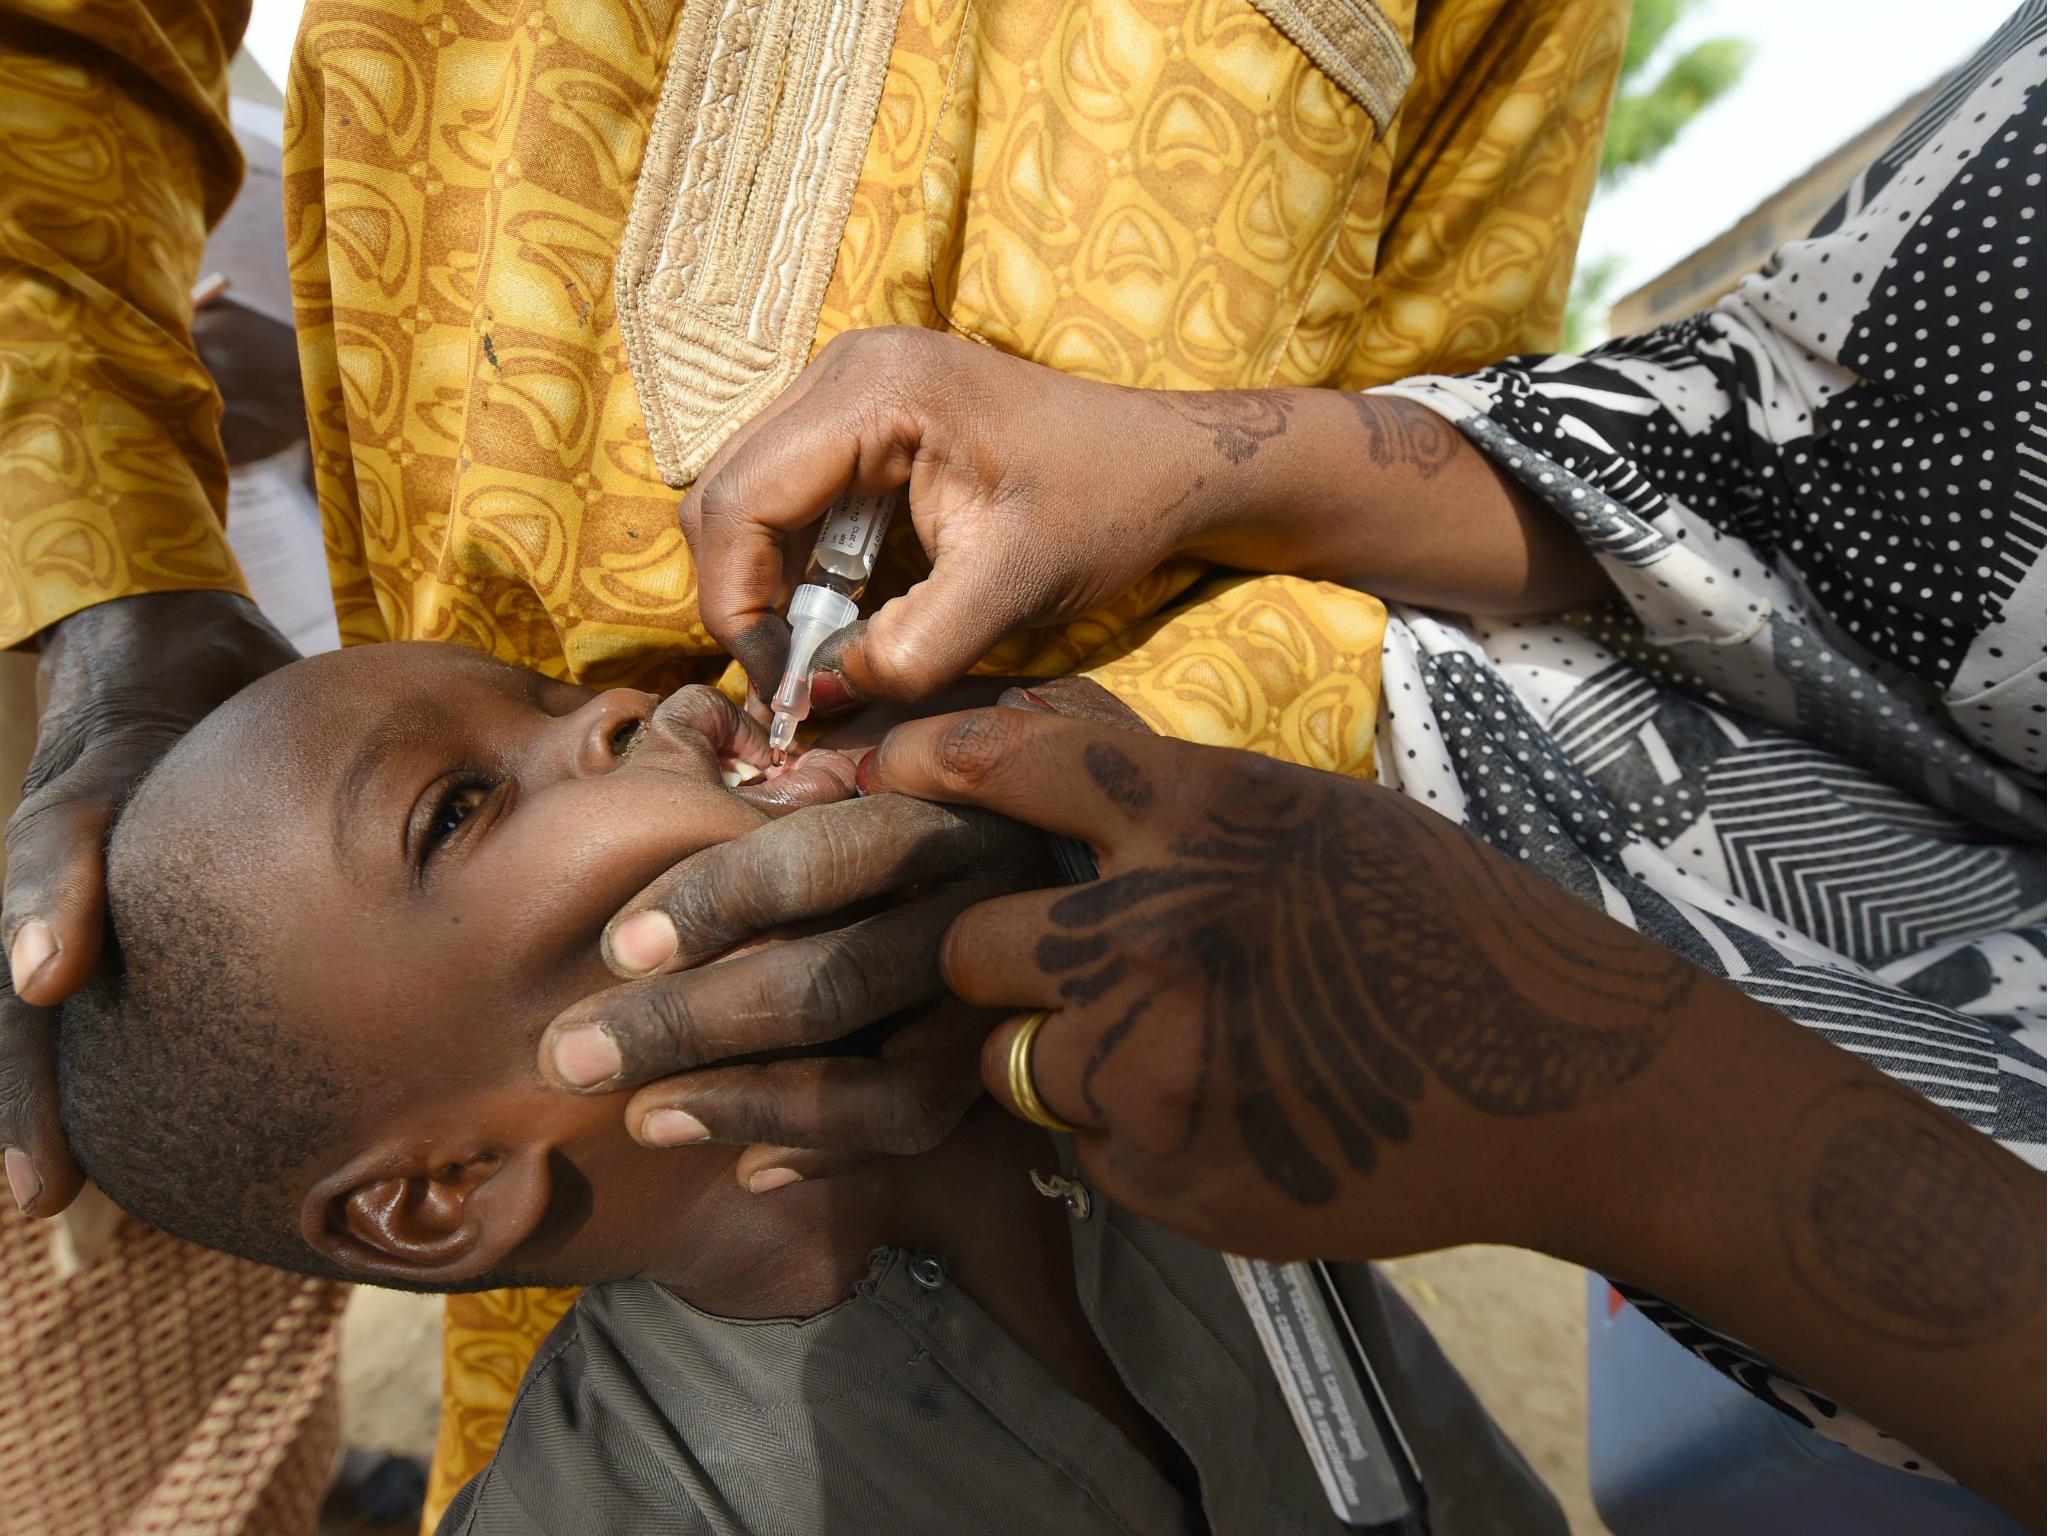 Health worker tries to immunise a child during a vaccination campaign against polio in northwest Nigeria on 22 April 2017.